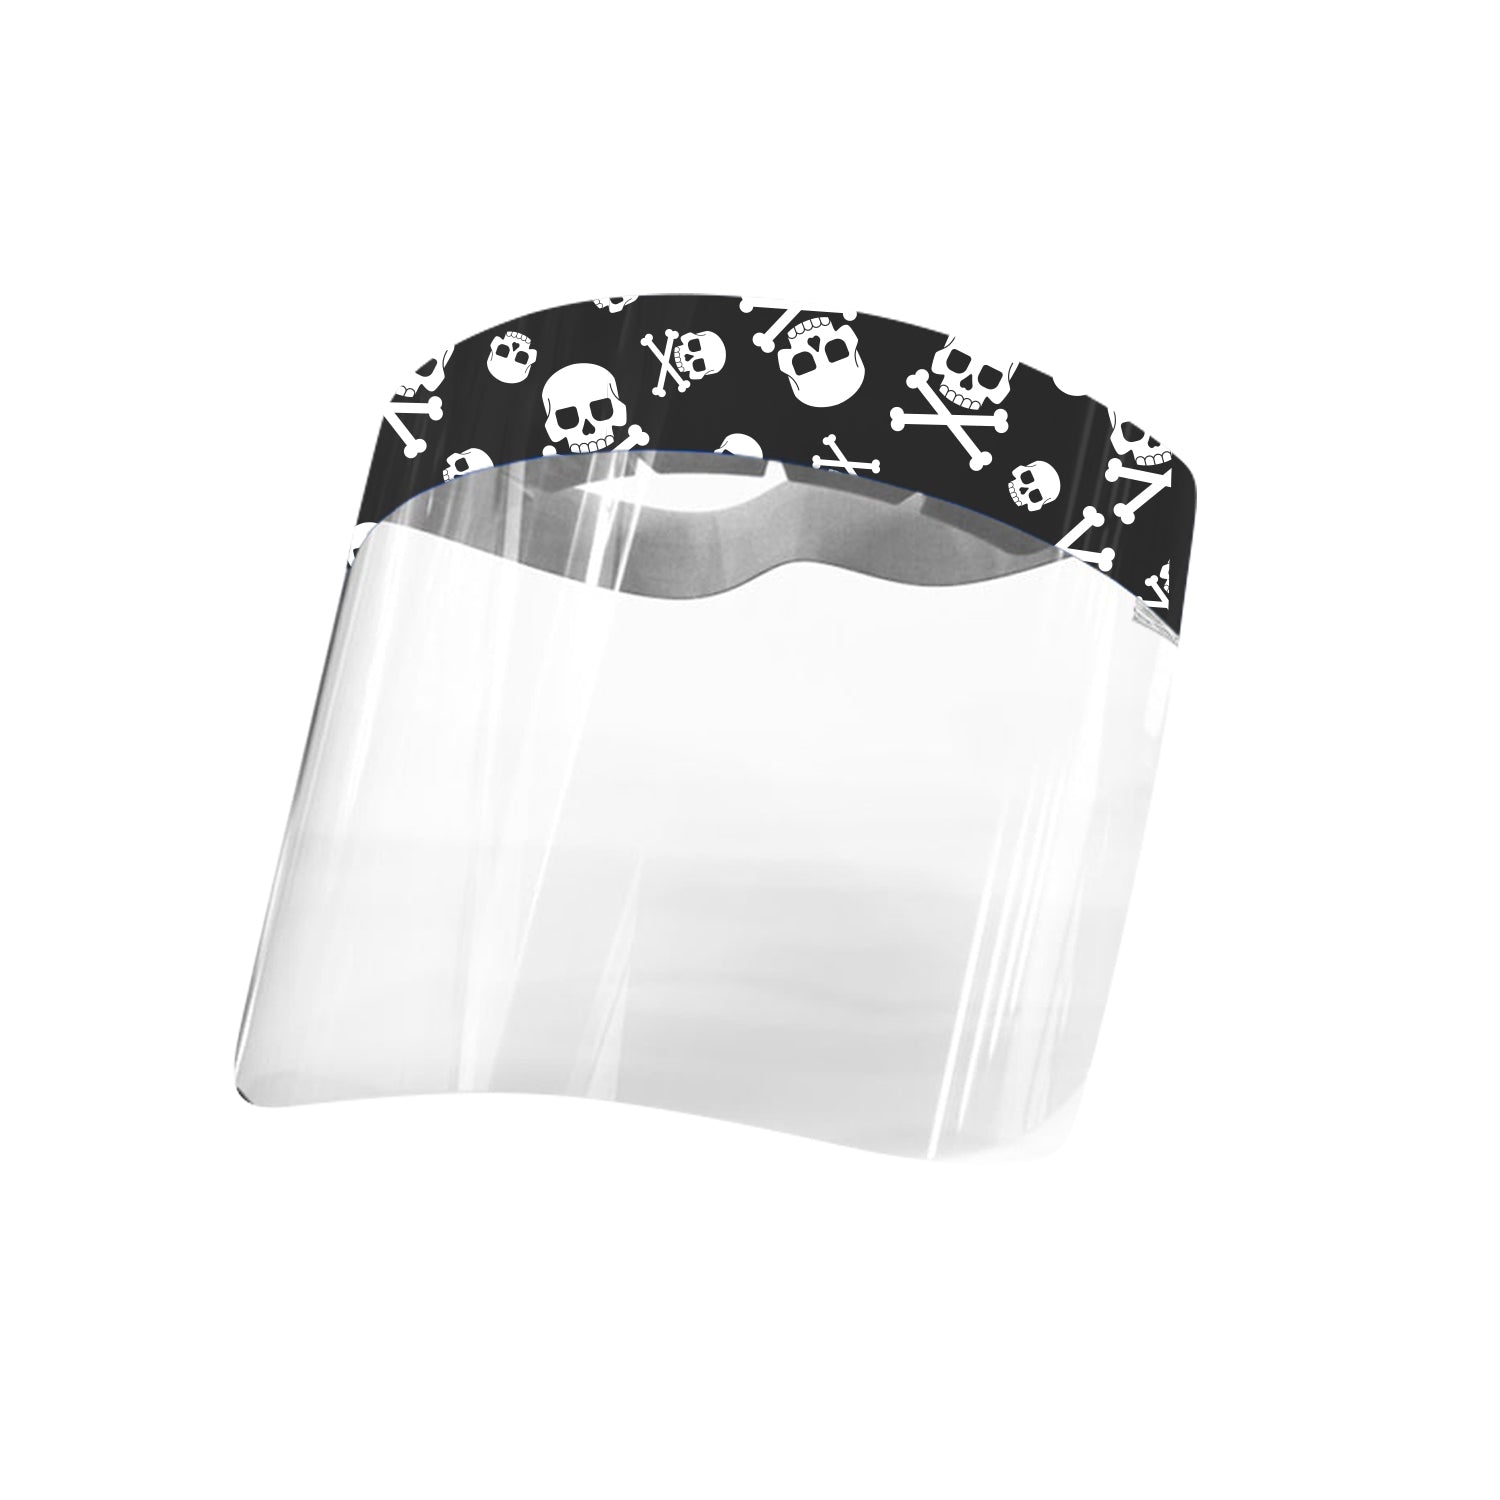 High quality face shields designed to stop any droplets from coughs or sneezes! Keep you and your family protected! Comfortable, Durable, Quality Material. Comes with removable protective liner. Easy To Clean.  Comes with adjustable strap. Crystal clear transparency.  Lightweight for tweens, teens and young adults. Jolly Roger Skull design.